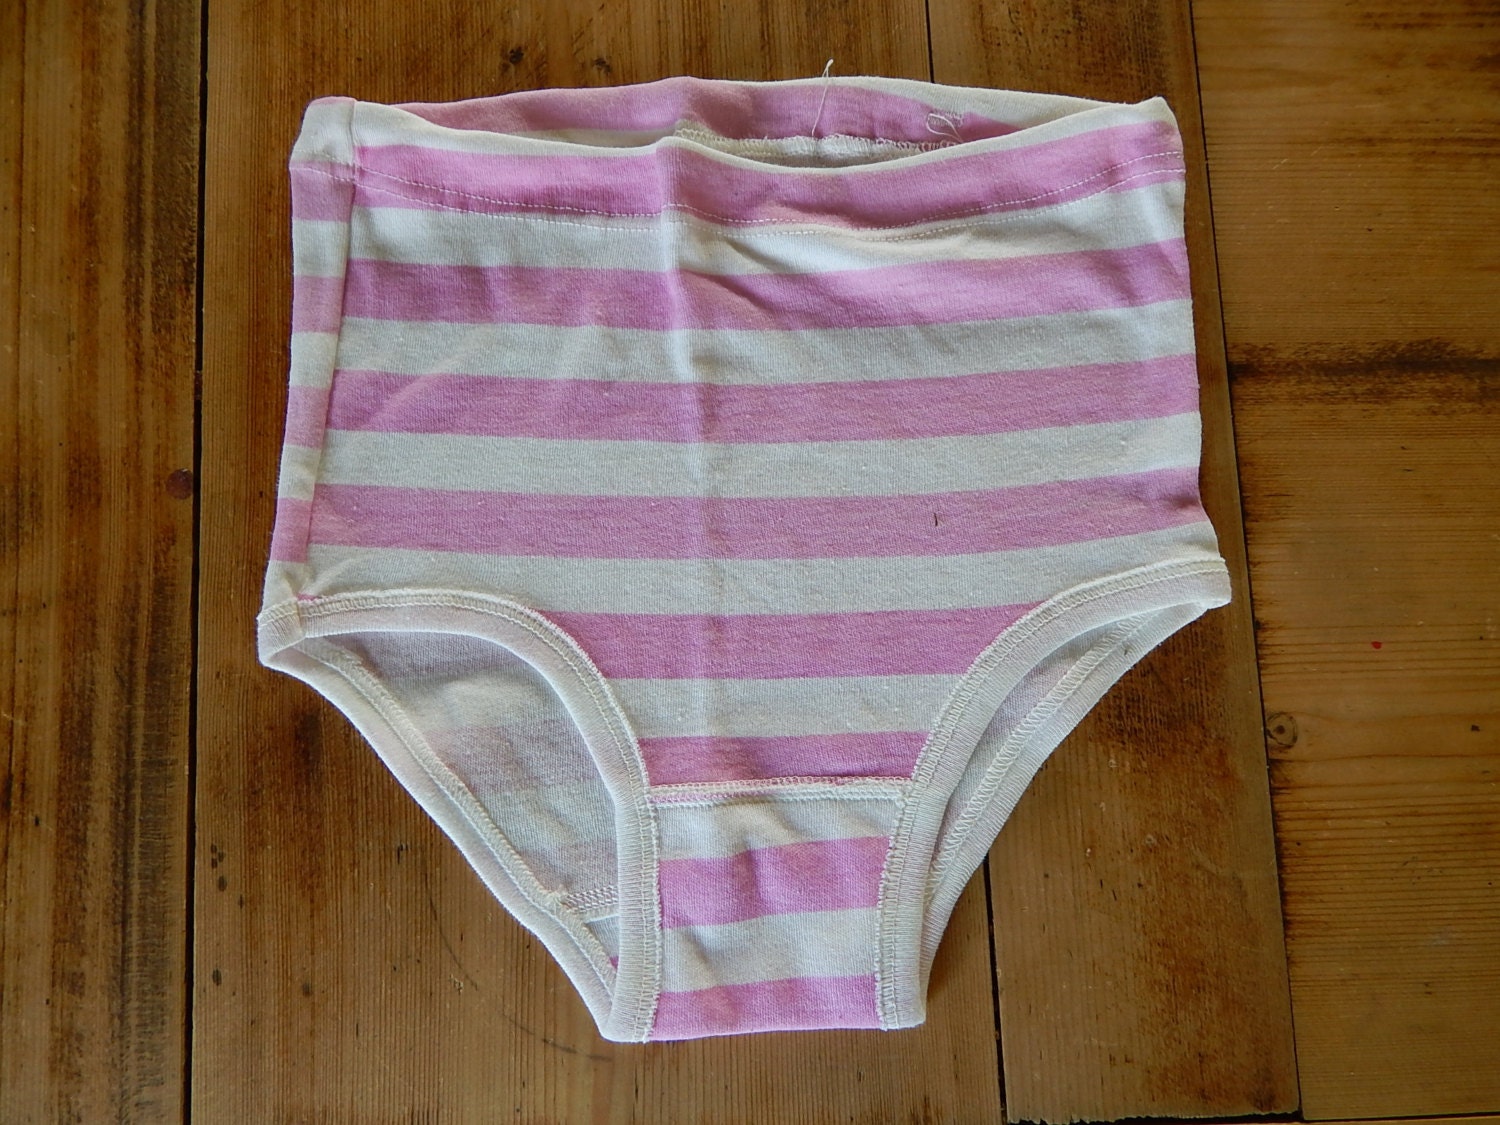 Vintage High Waist Girls Underpants, Vintage Cotton Kids Underwear Pink and  White Colour New Old Stock Collectible 8 Year 